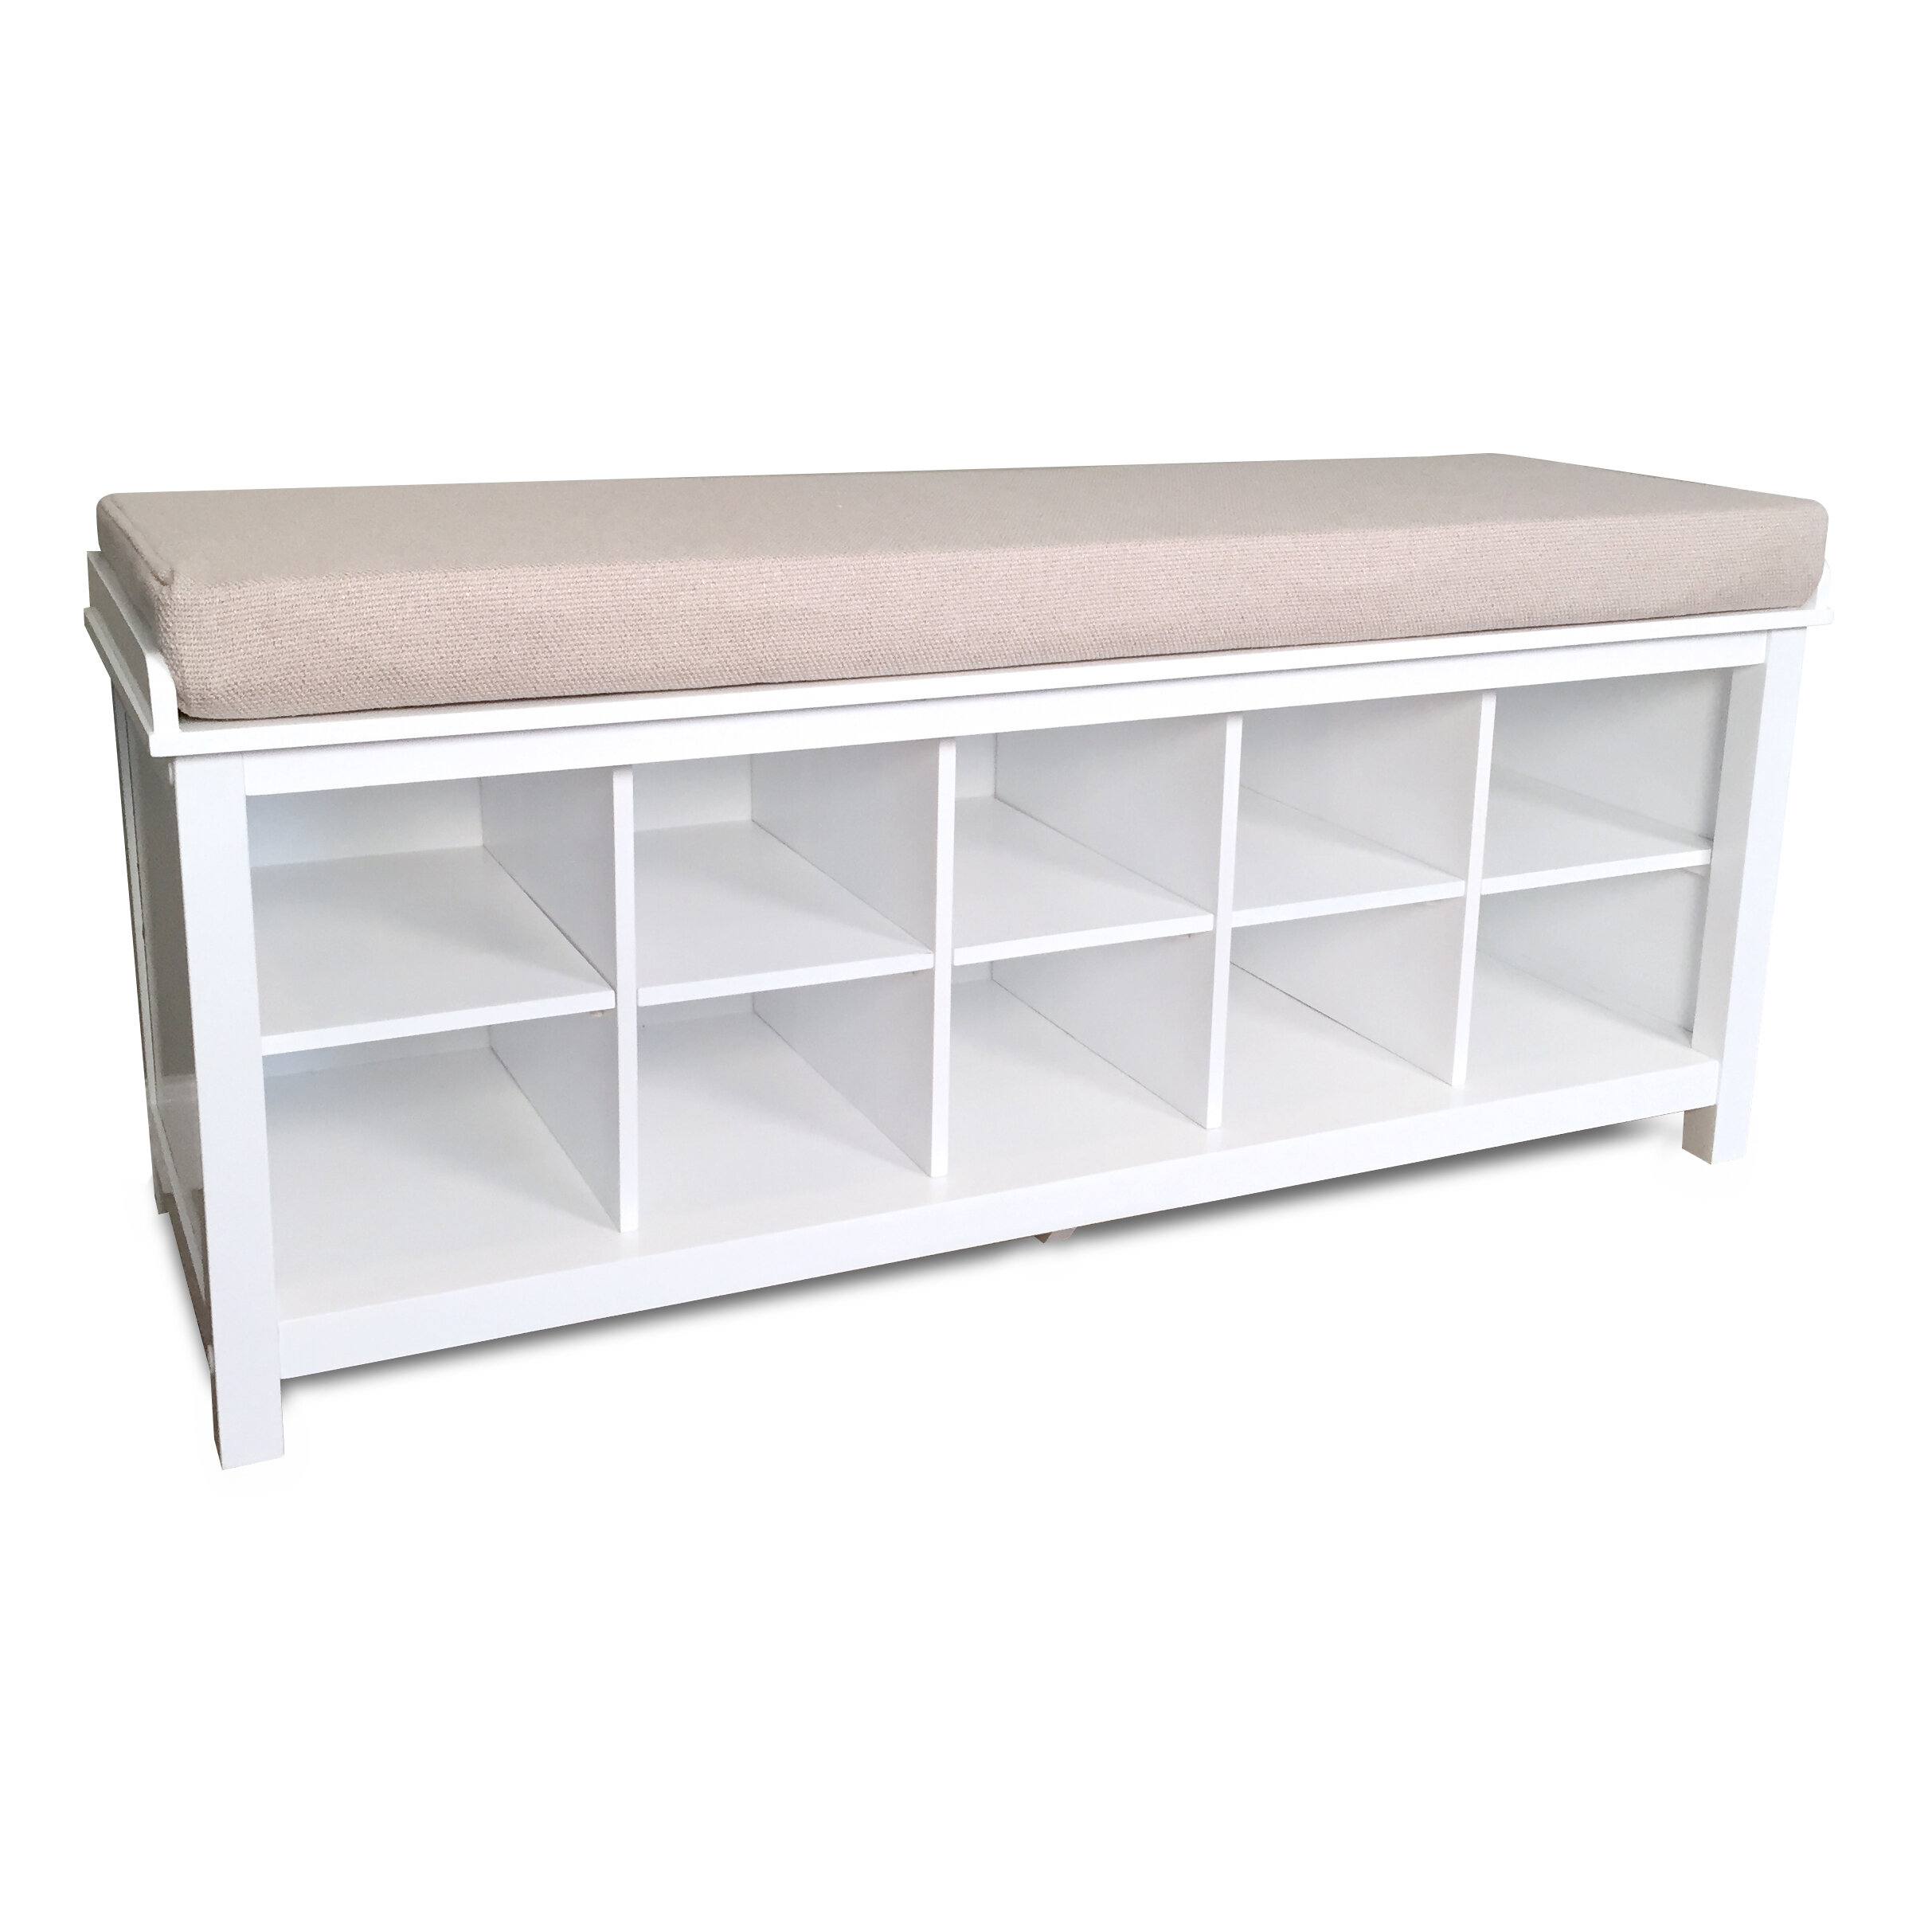 white shoe cubby